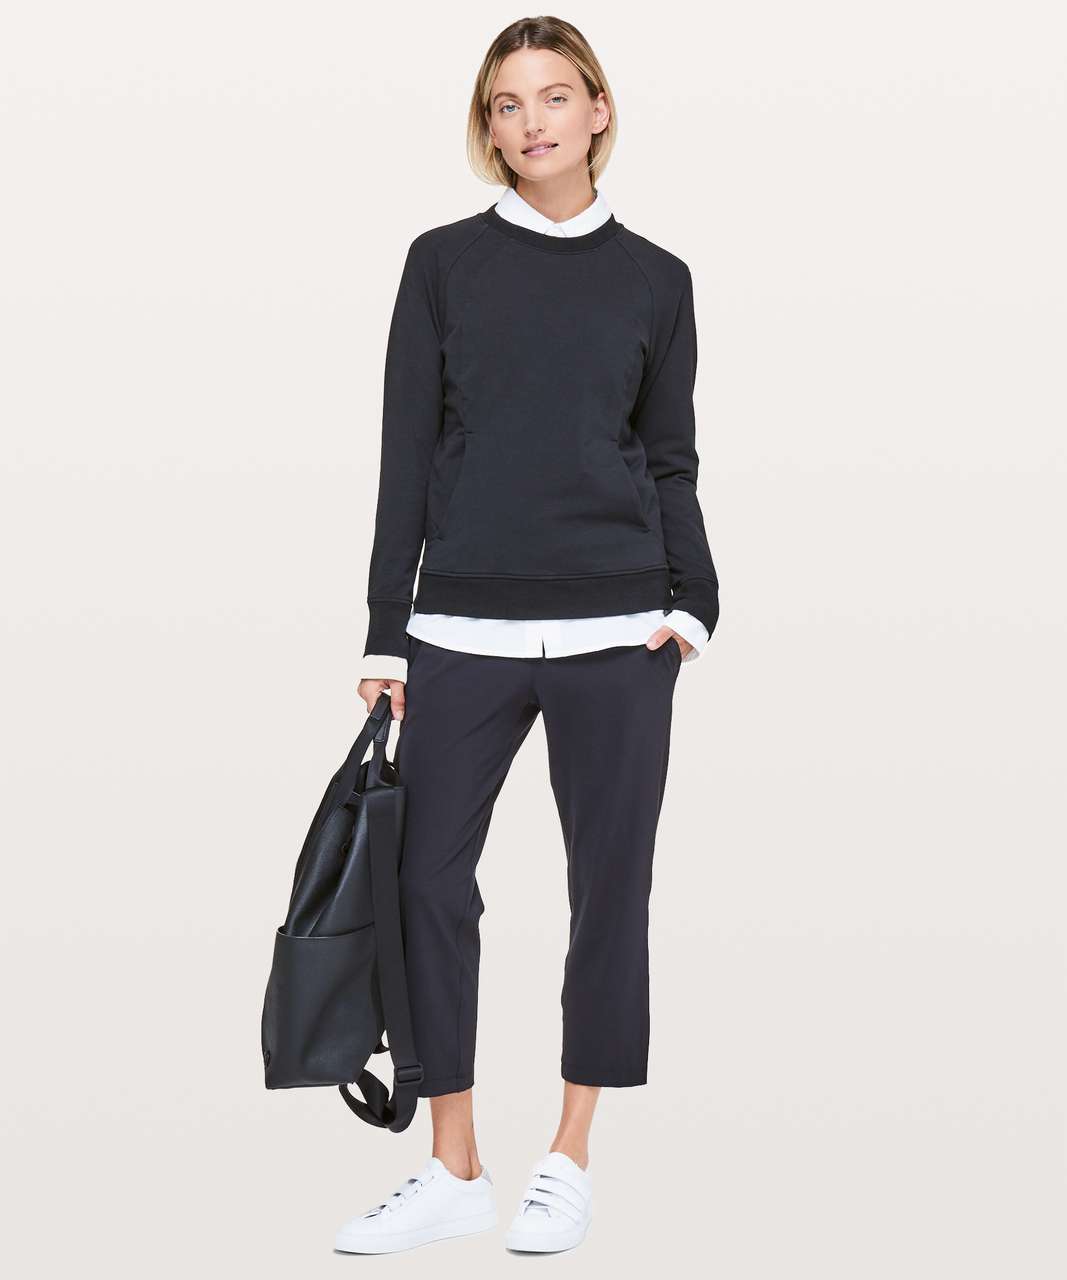 Lululemon On The Fly Crop *23" - Black (First Release)